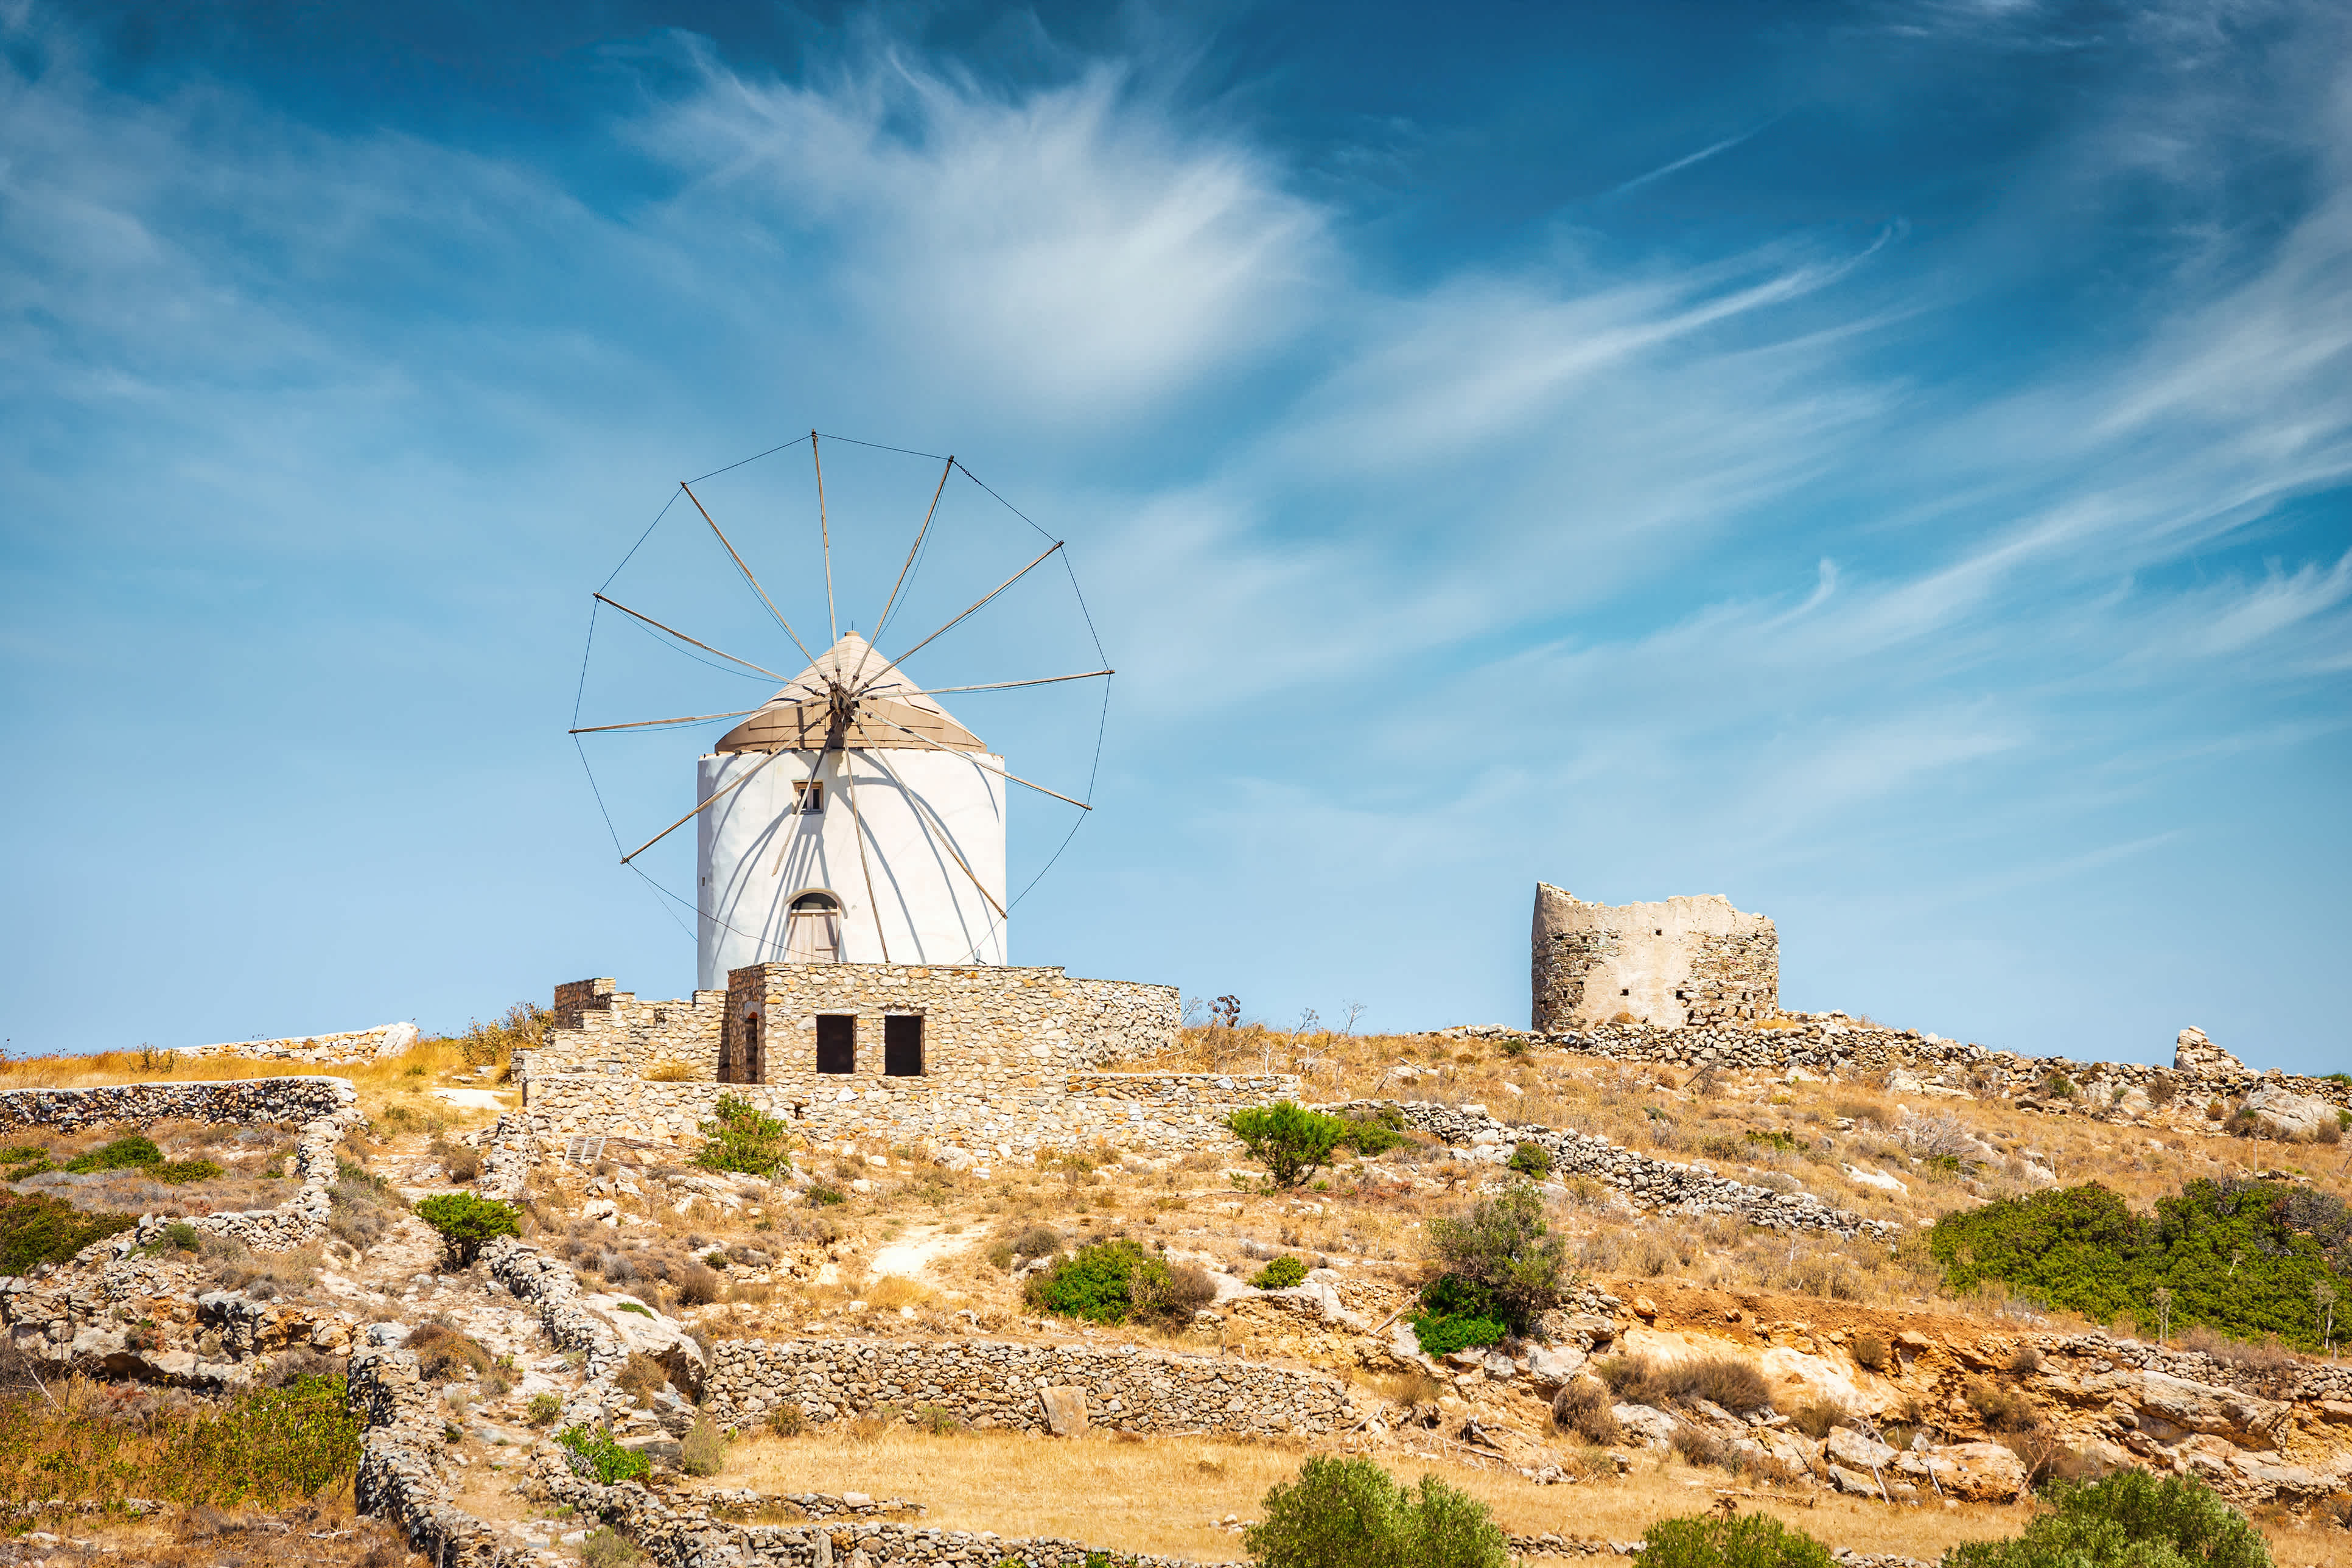 Picturesque villages with windmills - to experience on a Paros holiday.